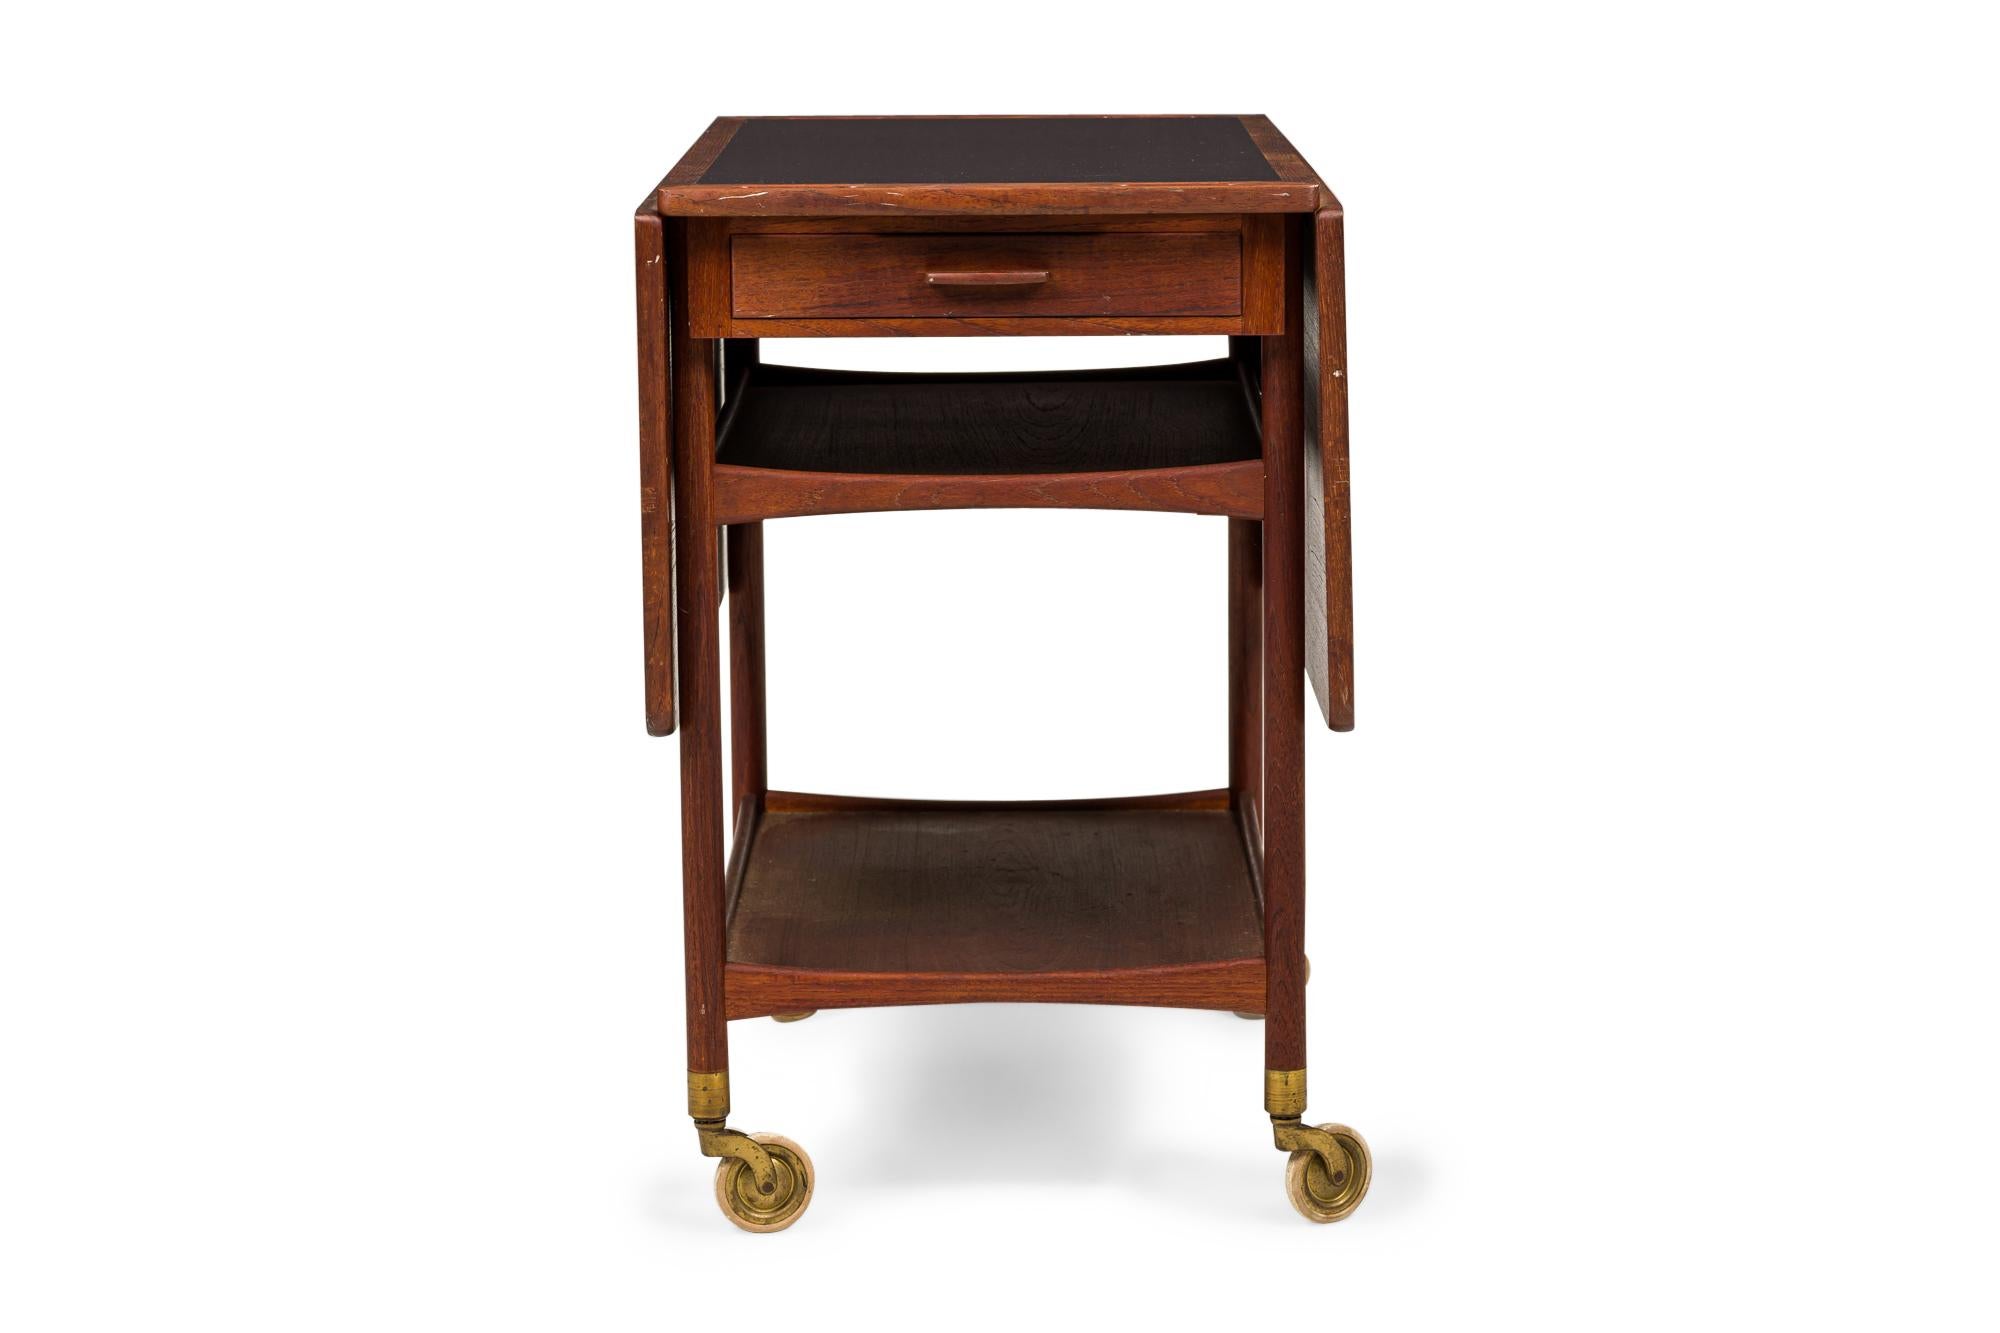 Danish Mid-Century rectangular two-tier serving trolley with a teak frame, an inset black laminate top, and two teak drop leaves, resting on four casters. (LUDVIG PONTOPPIDAN)(Similar piece: DUF0231)
